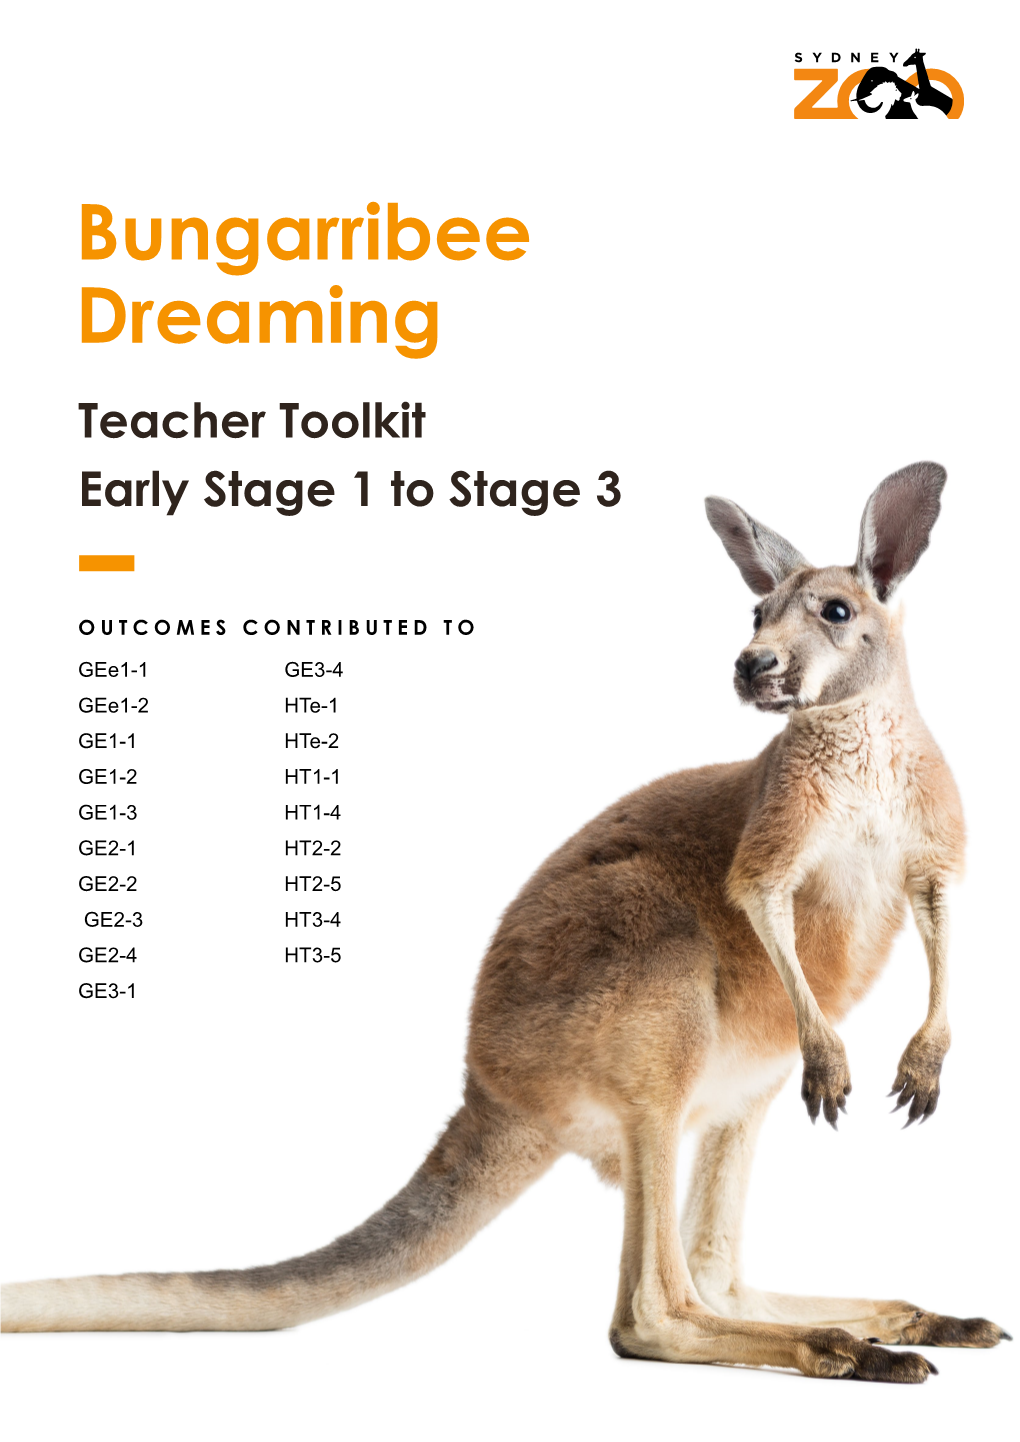 Bungarribee Dreaming Teacher Toolkit Early Stage 1 to Stage 3